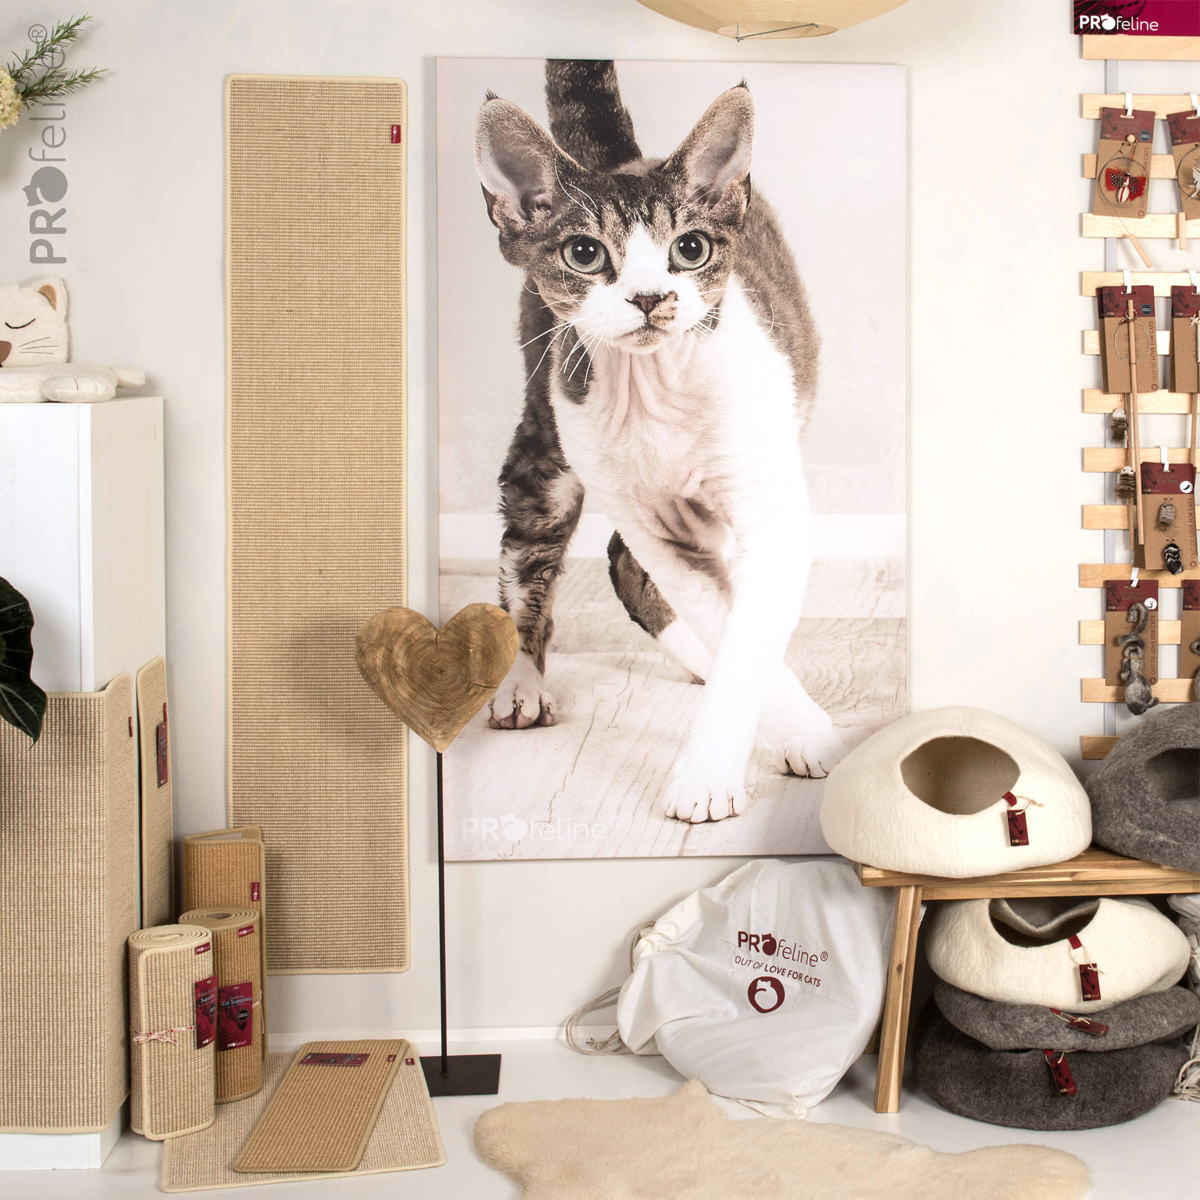 Cat Furniture by Profeline Has Wall Cat Scratchers & Wool Cat Caves | Buy at Made Moggie Australia.